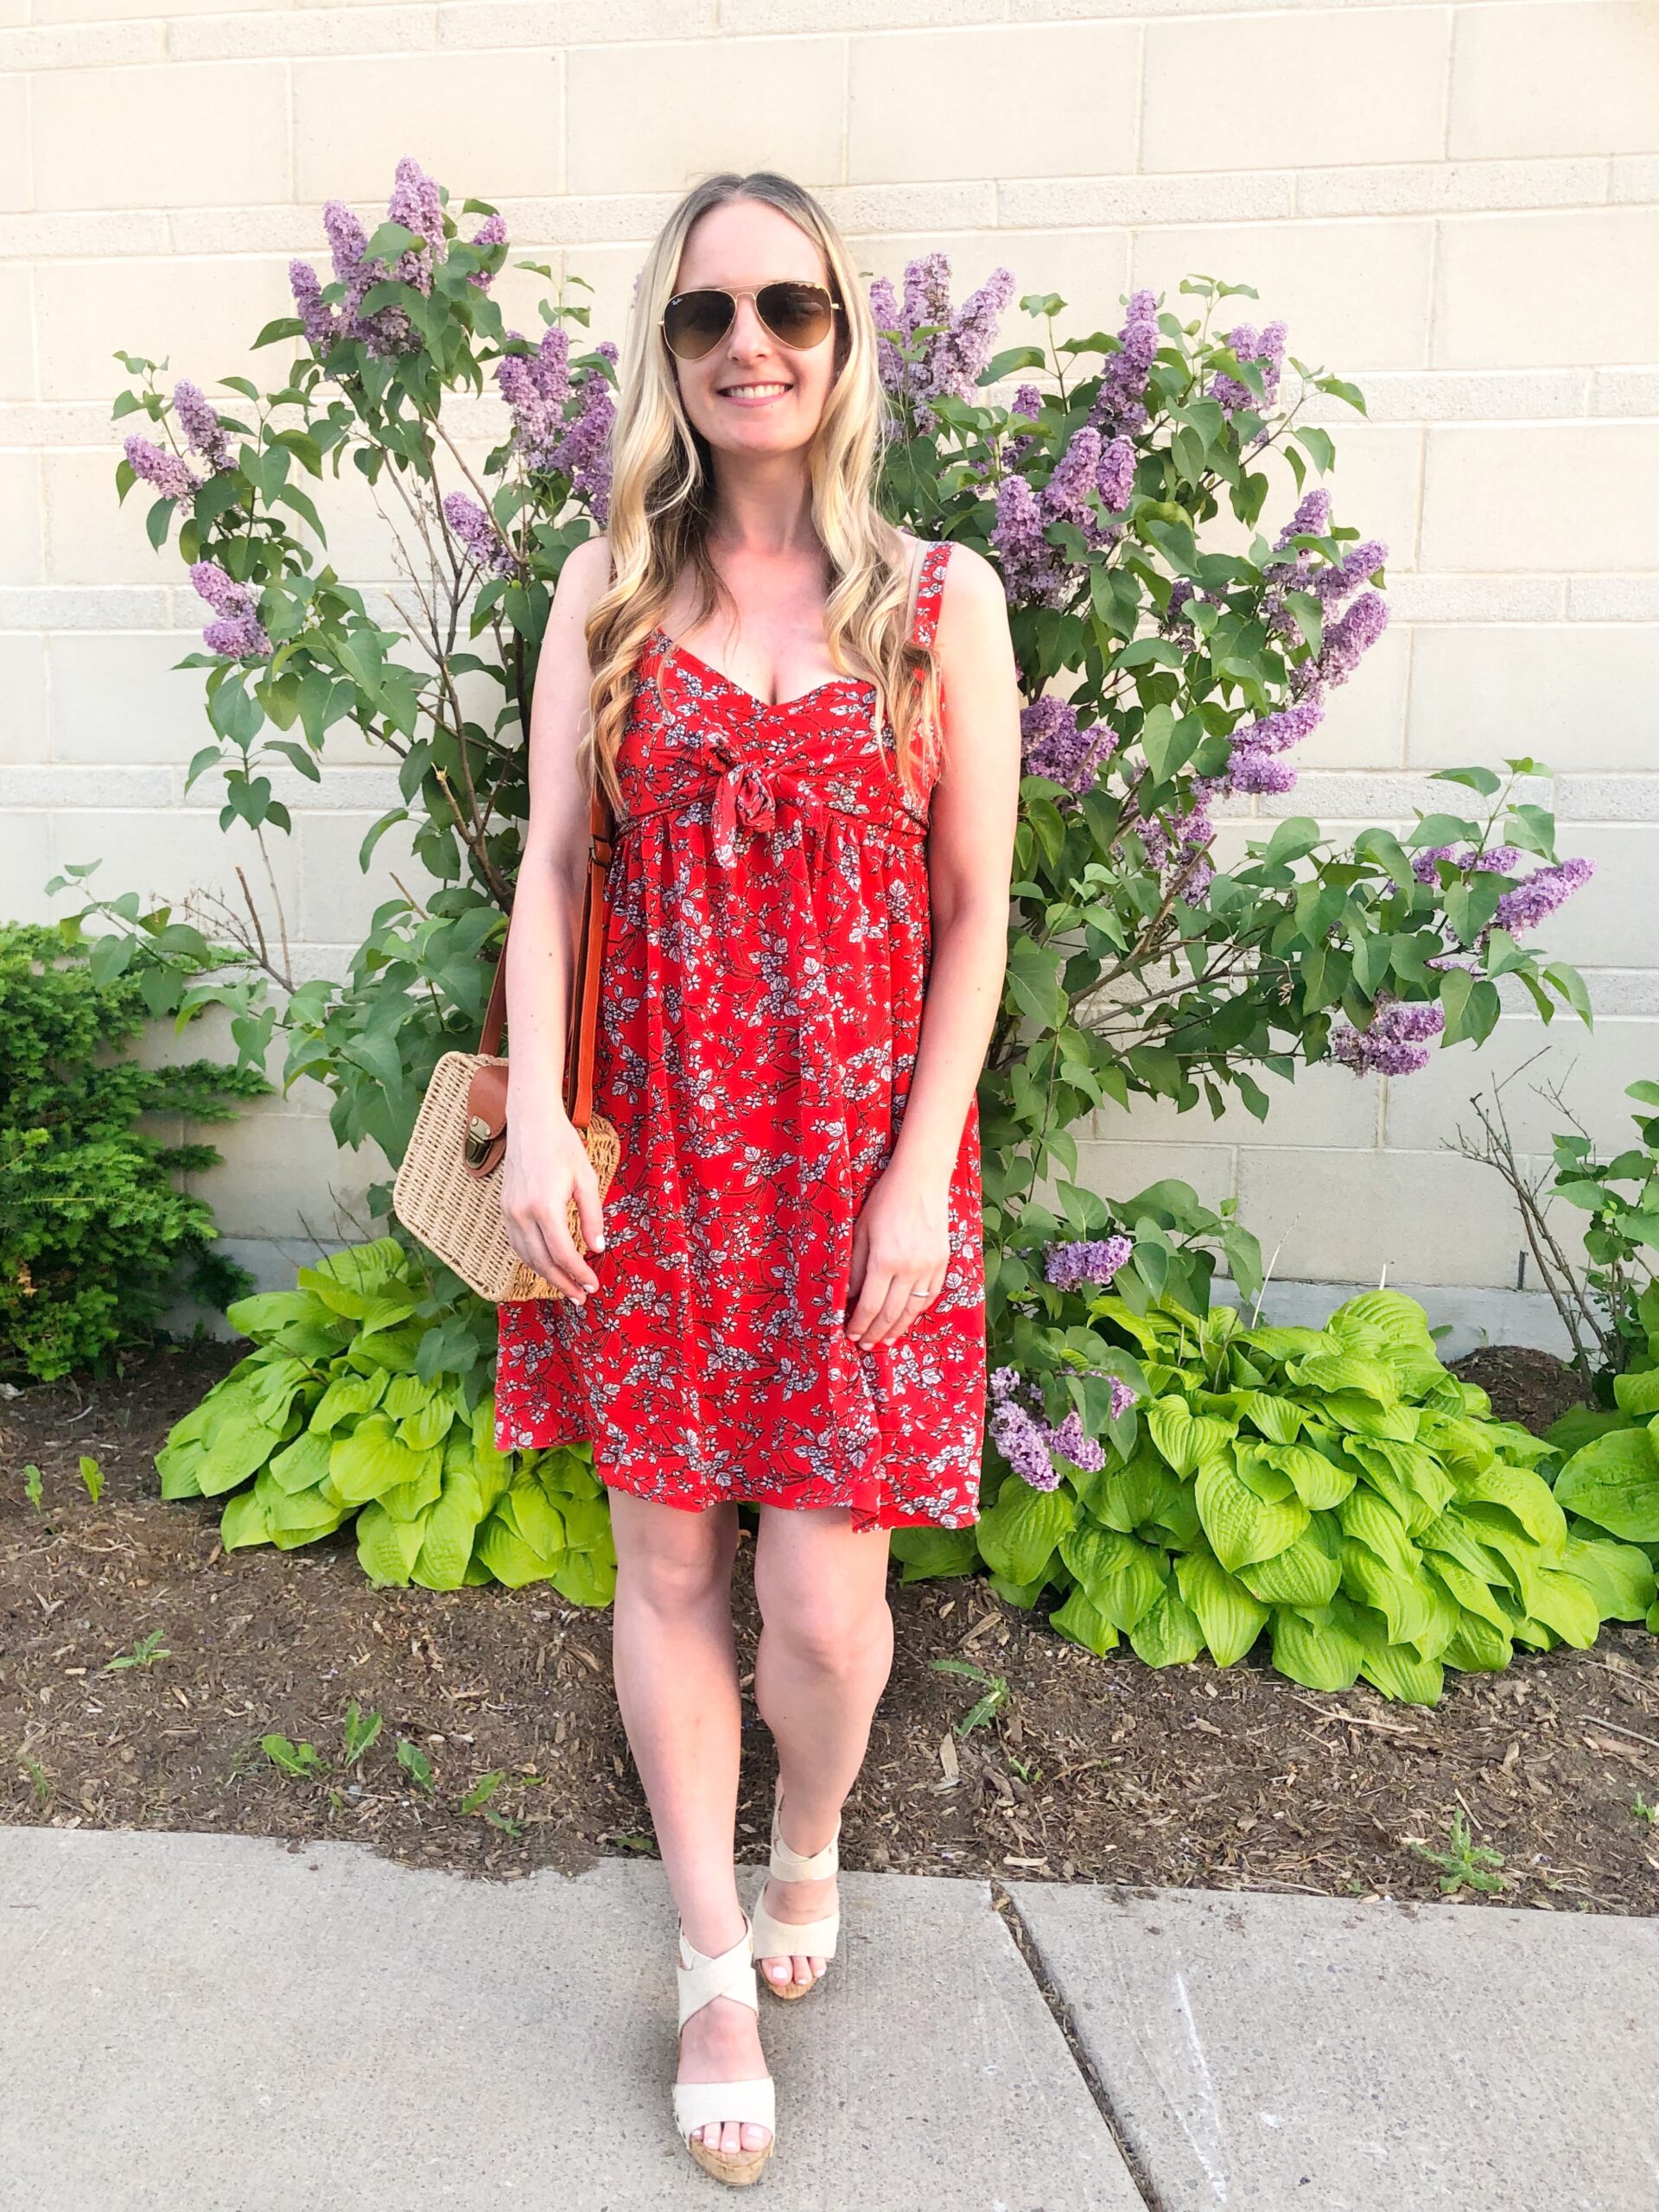 Red Dress with Pockets from Shein on Livin' Life with Style 